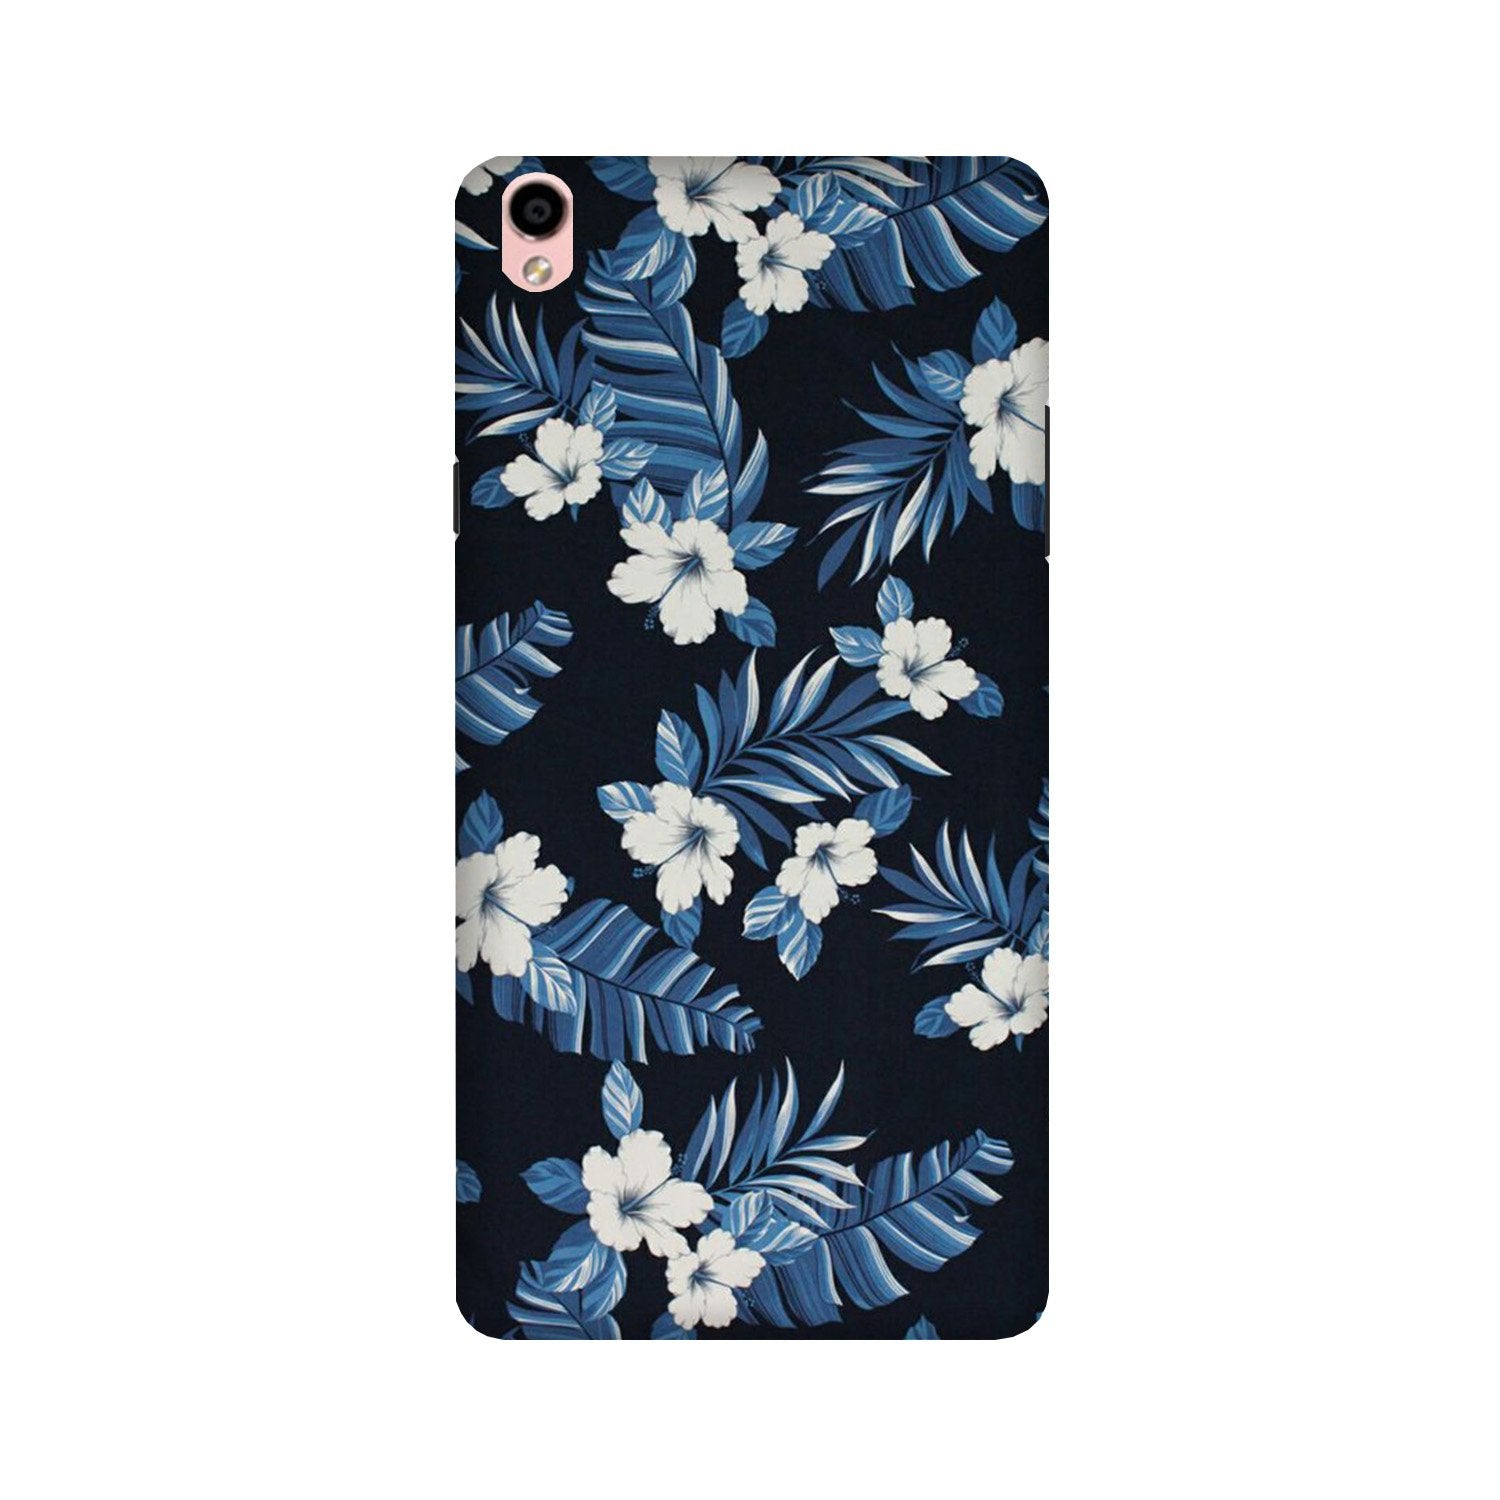 White flowers Blue Background2 Case for Oppo F1 Plus